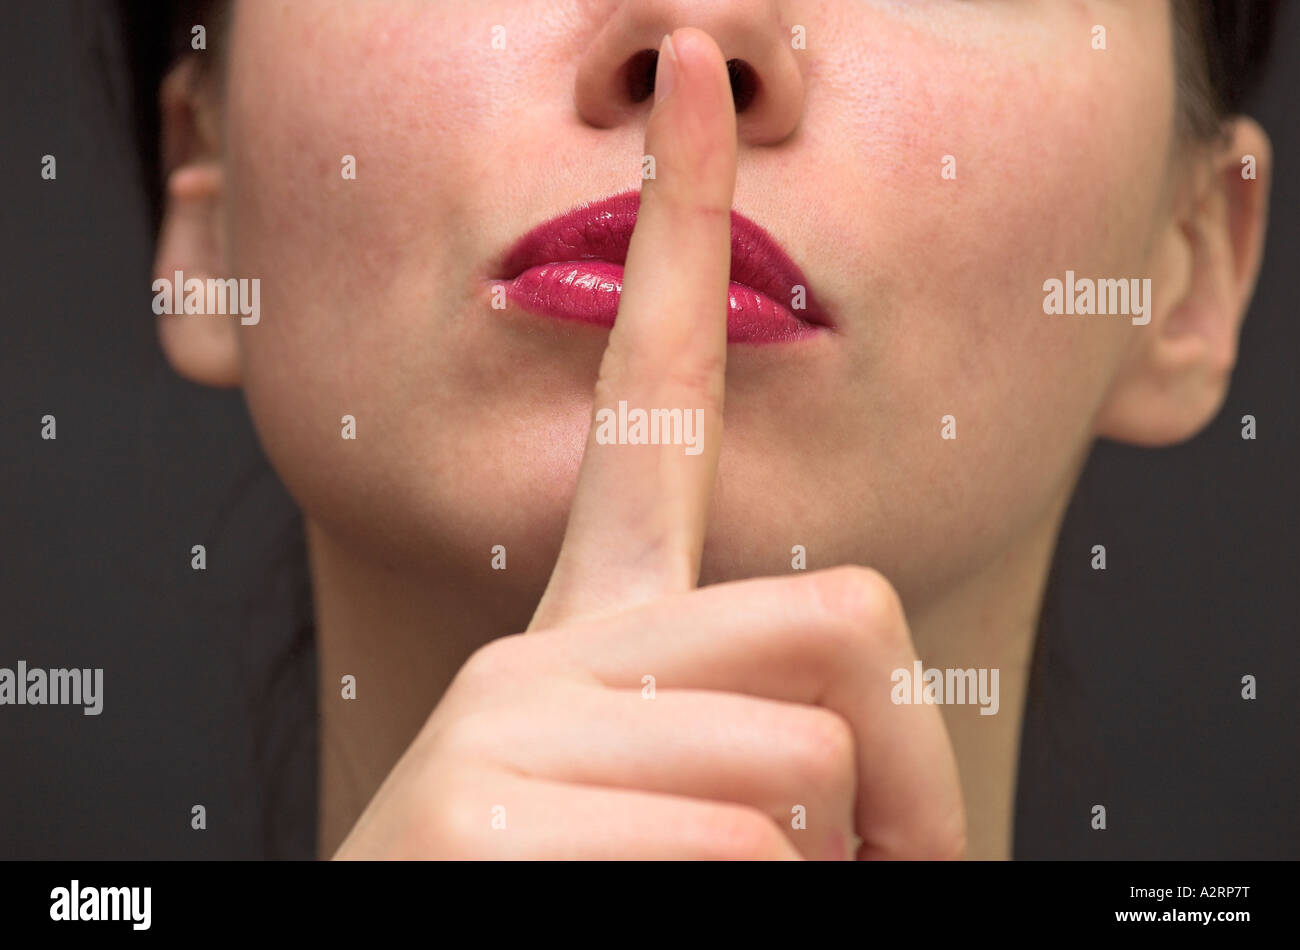 Young Woman Holding Index Finger to Lips Close Up Stock Photo